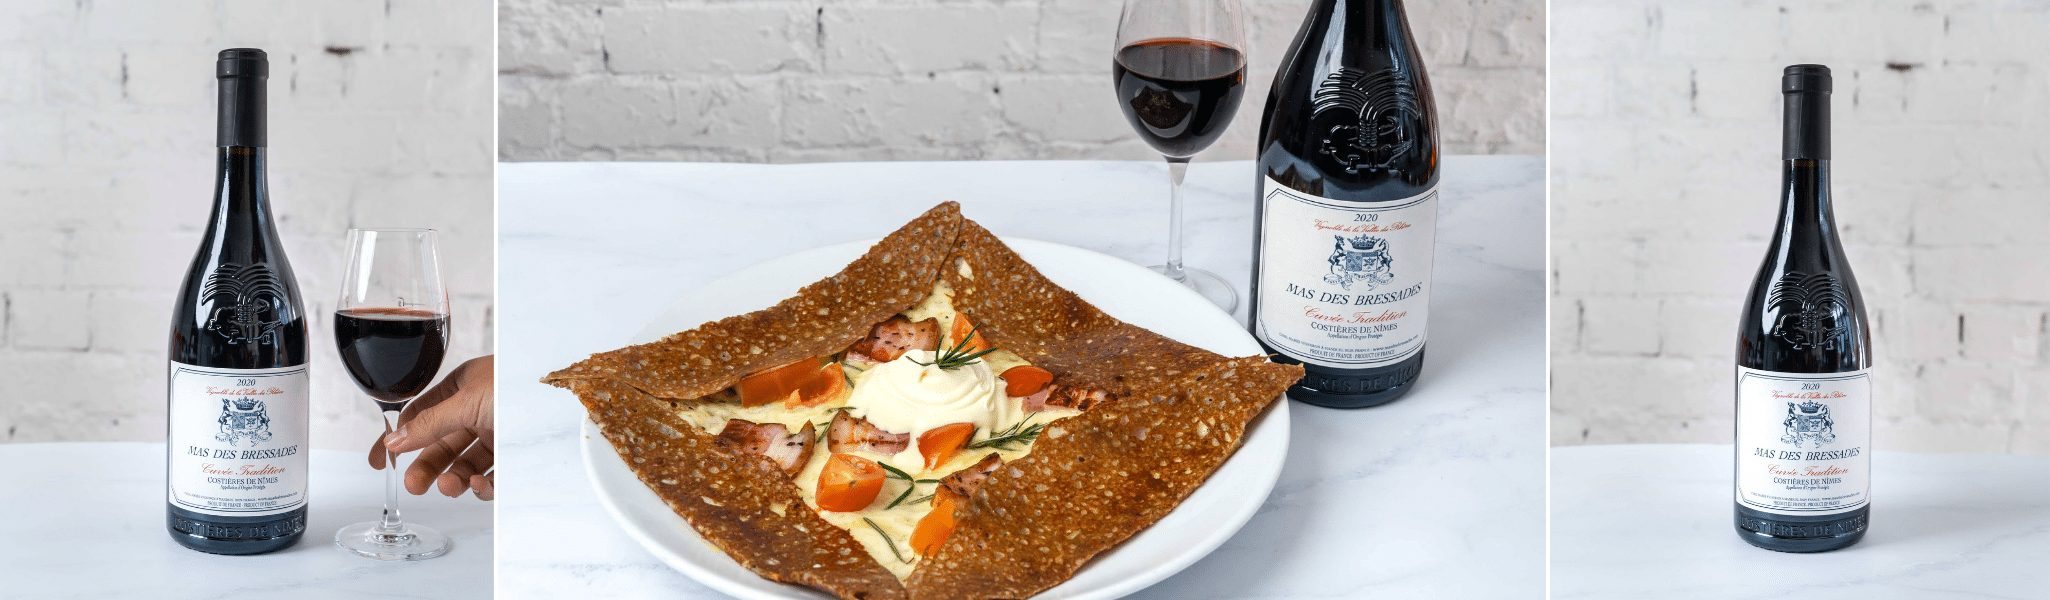 Four Frogs Crêperie - August Wine of the Month